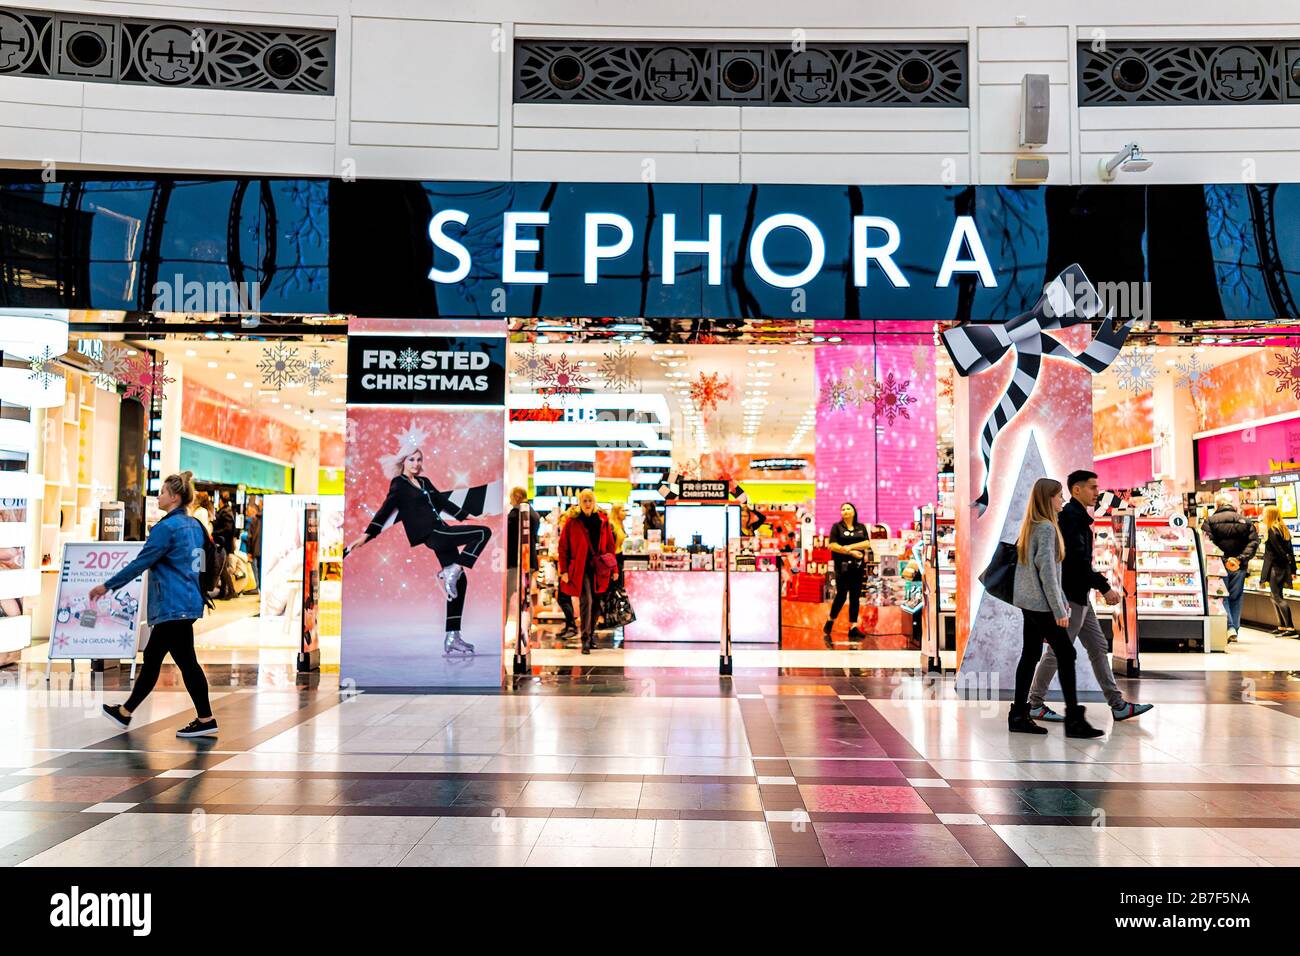 Warsaw, Poland - December 23, 2019: Storefront sign of Sephora cosmetics  beauty chain store inside of Westfield Arkadia shopping mall complex with  peo Stock Photo - Alamy